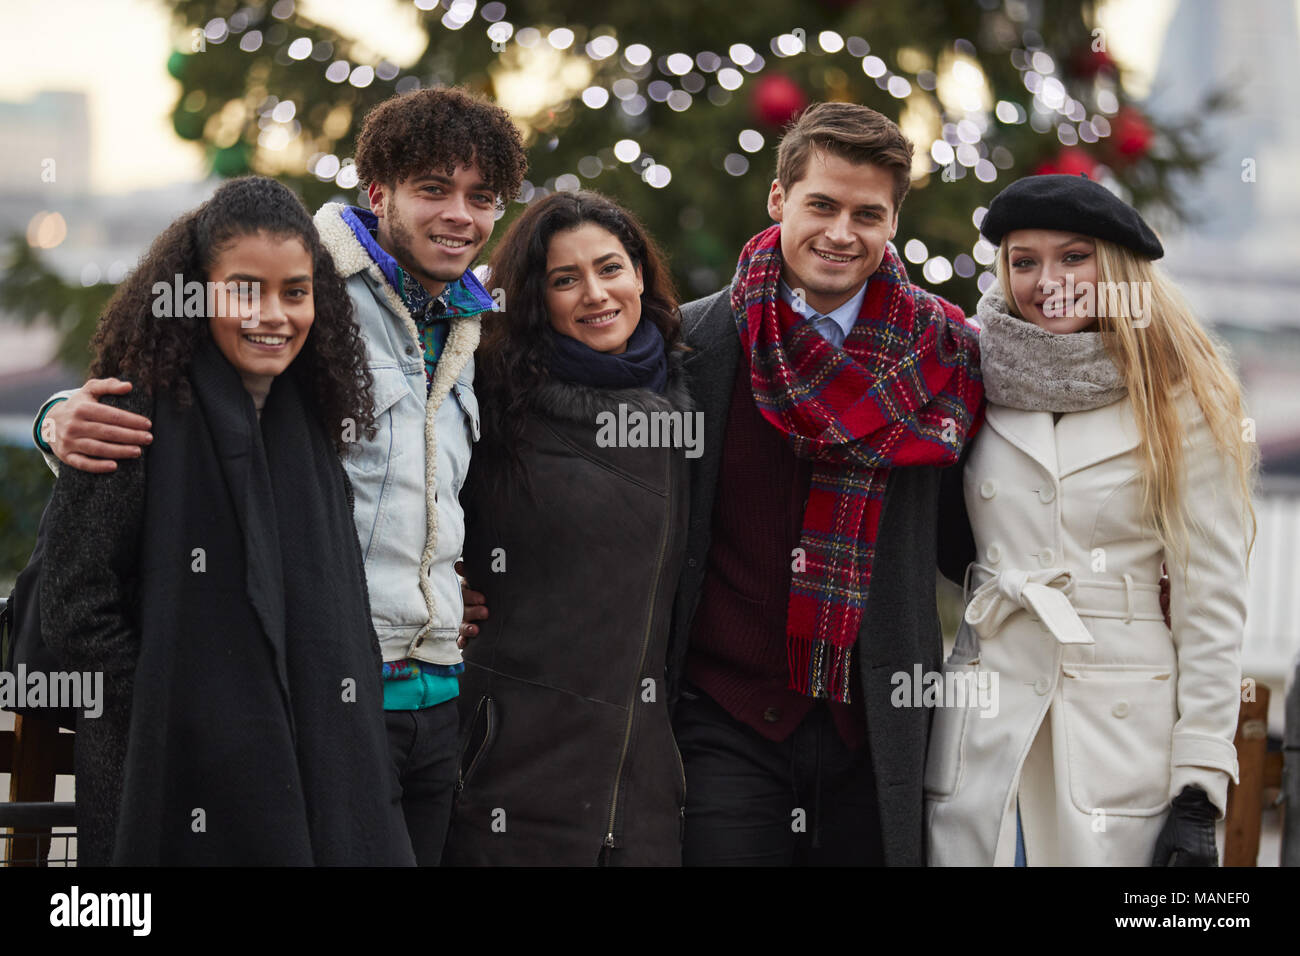 Portrait Of Young Friends On Walk Standing By Christmas Tree Stock Photo